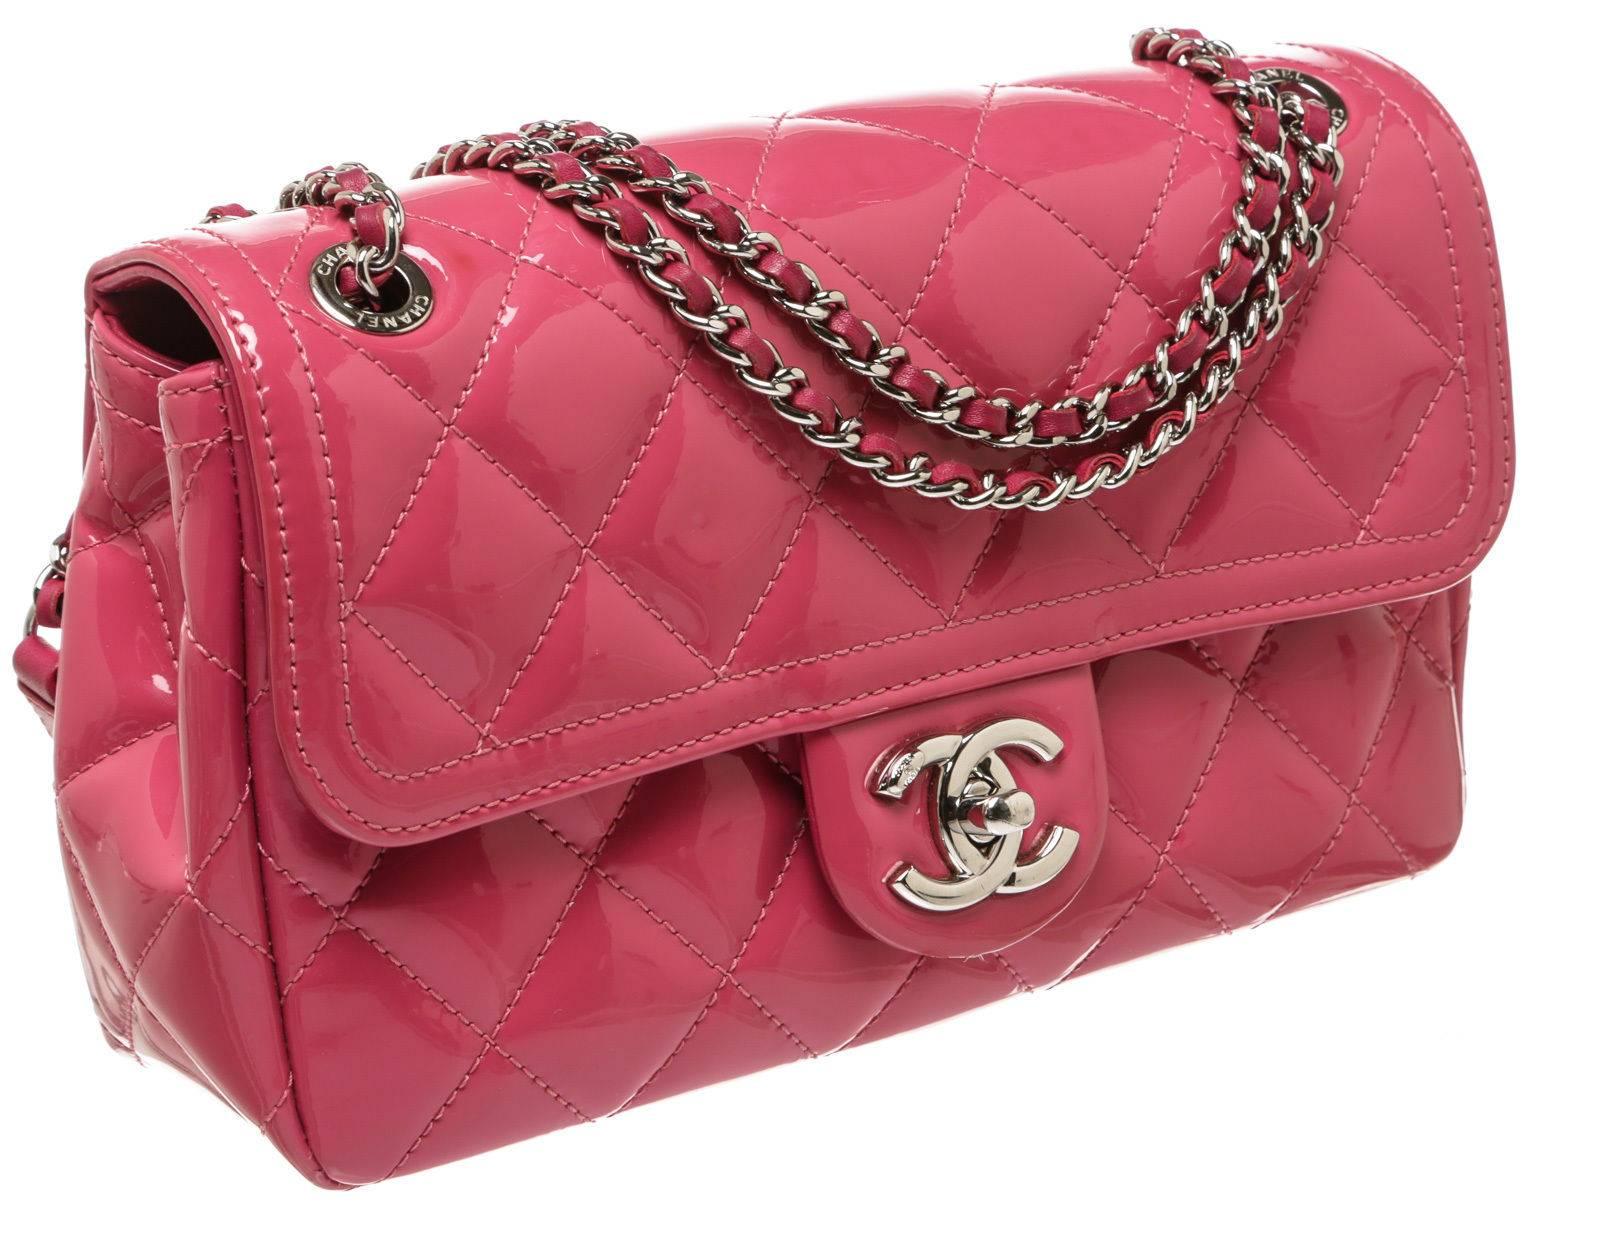 Designer: Chanel
Type:
Handbag
Condition:
Exterior: Pre-owned in very good condition - faint wear
Interior: Pre-owned in very good condition - faint wear
Color:
Pink
Material:
Patent Leather
Dimensions:
8.5